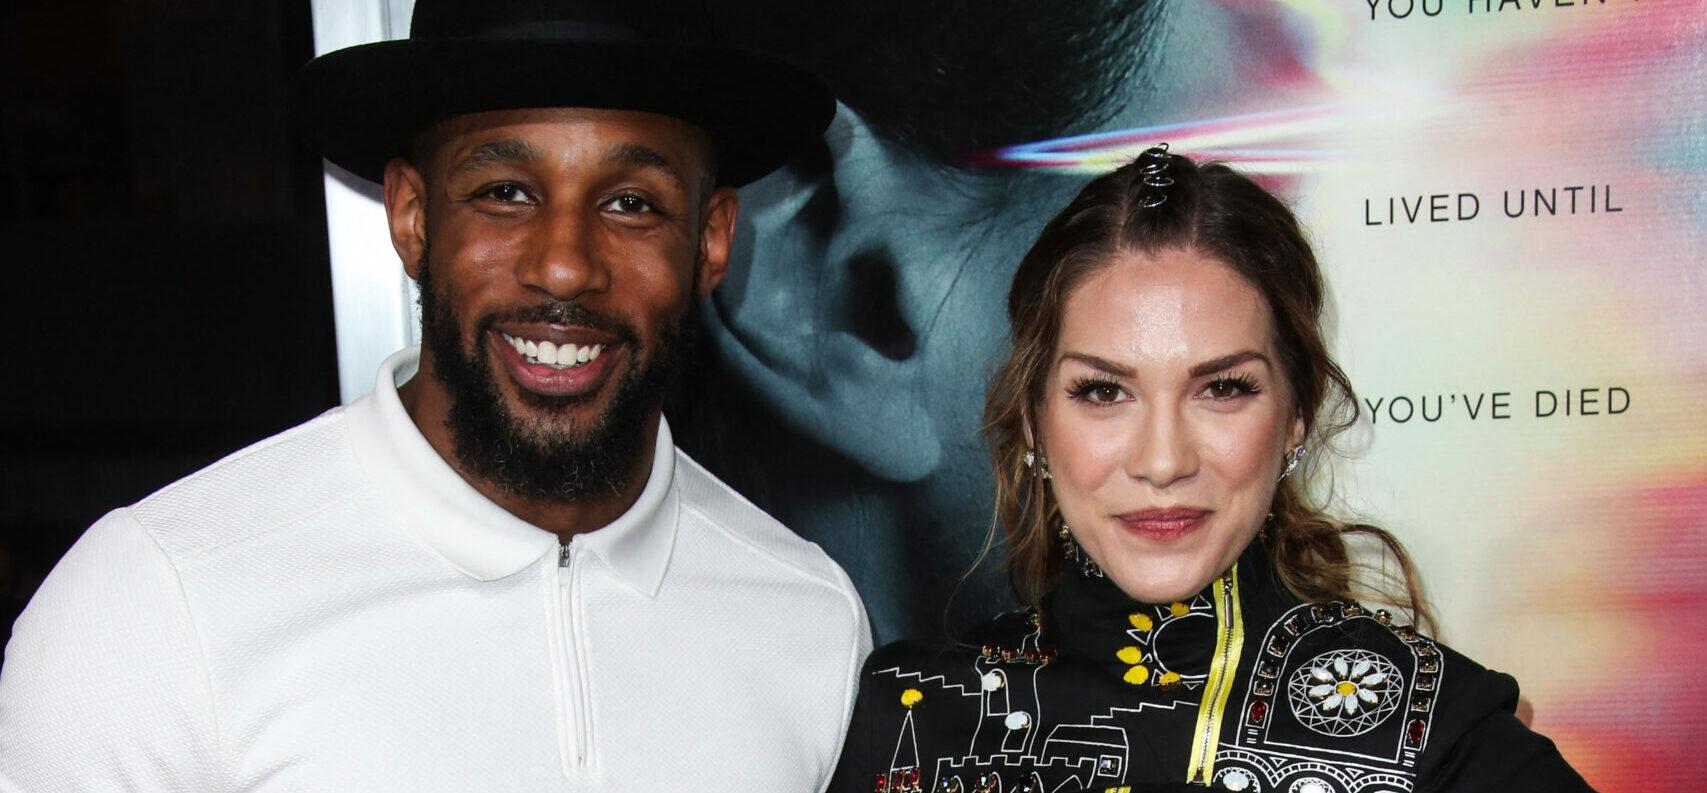 Allison Holker Claims There Were “No Arguments, Issues ” Prior To tWitch’s Death